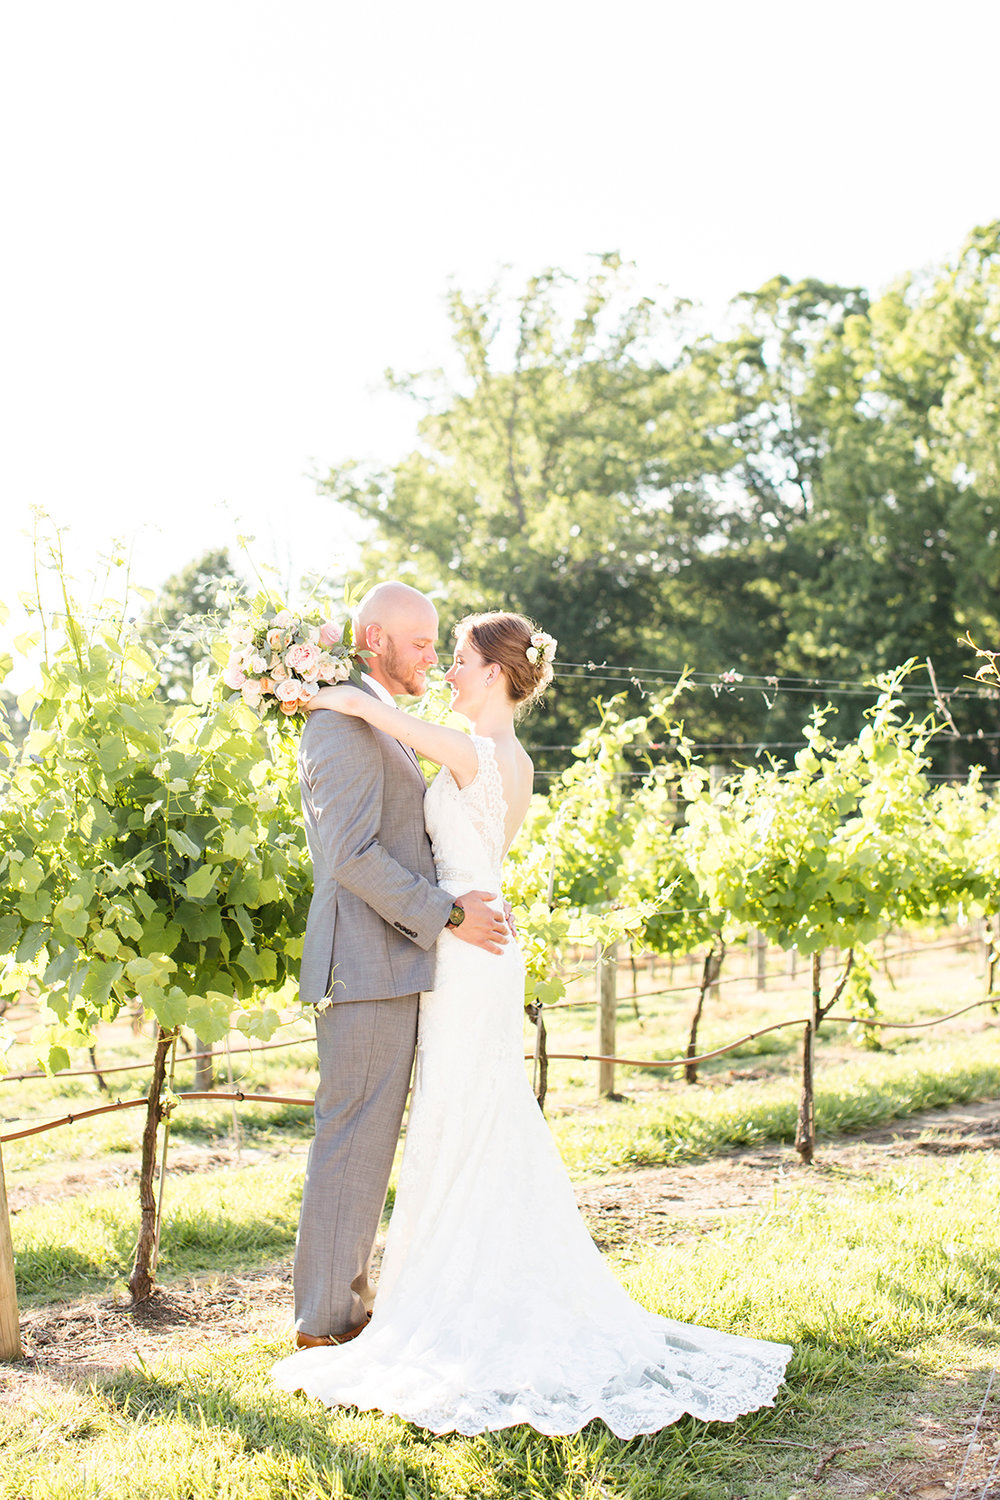 Couple After Outdoor Ceremony at Ashton Creek Vineyard .jpg